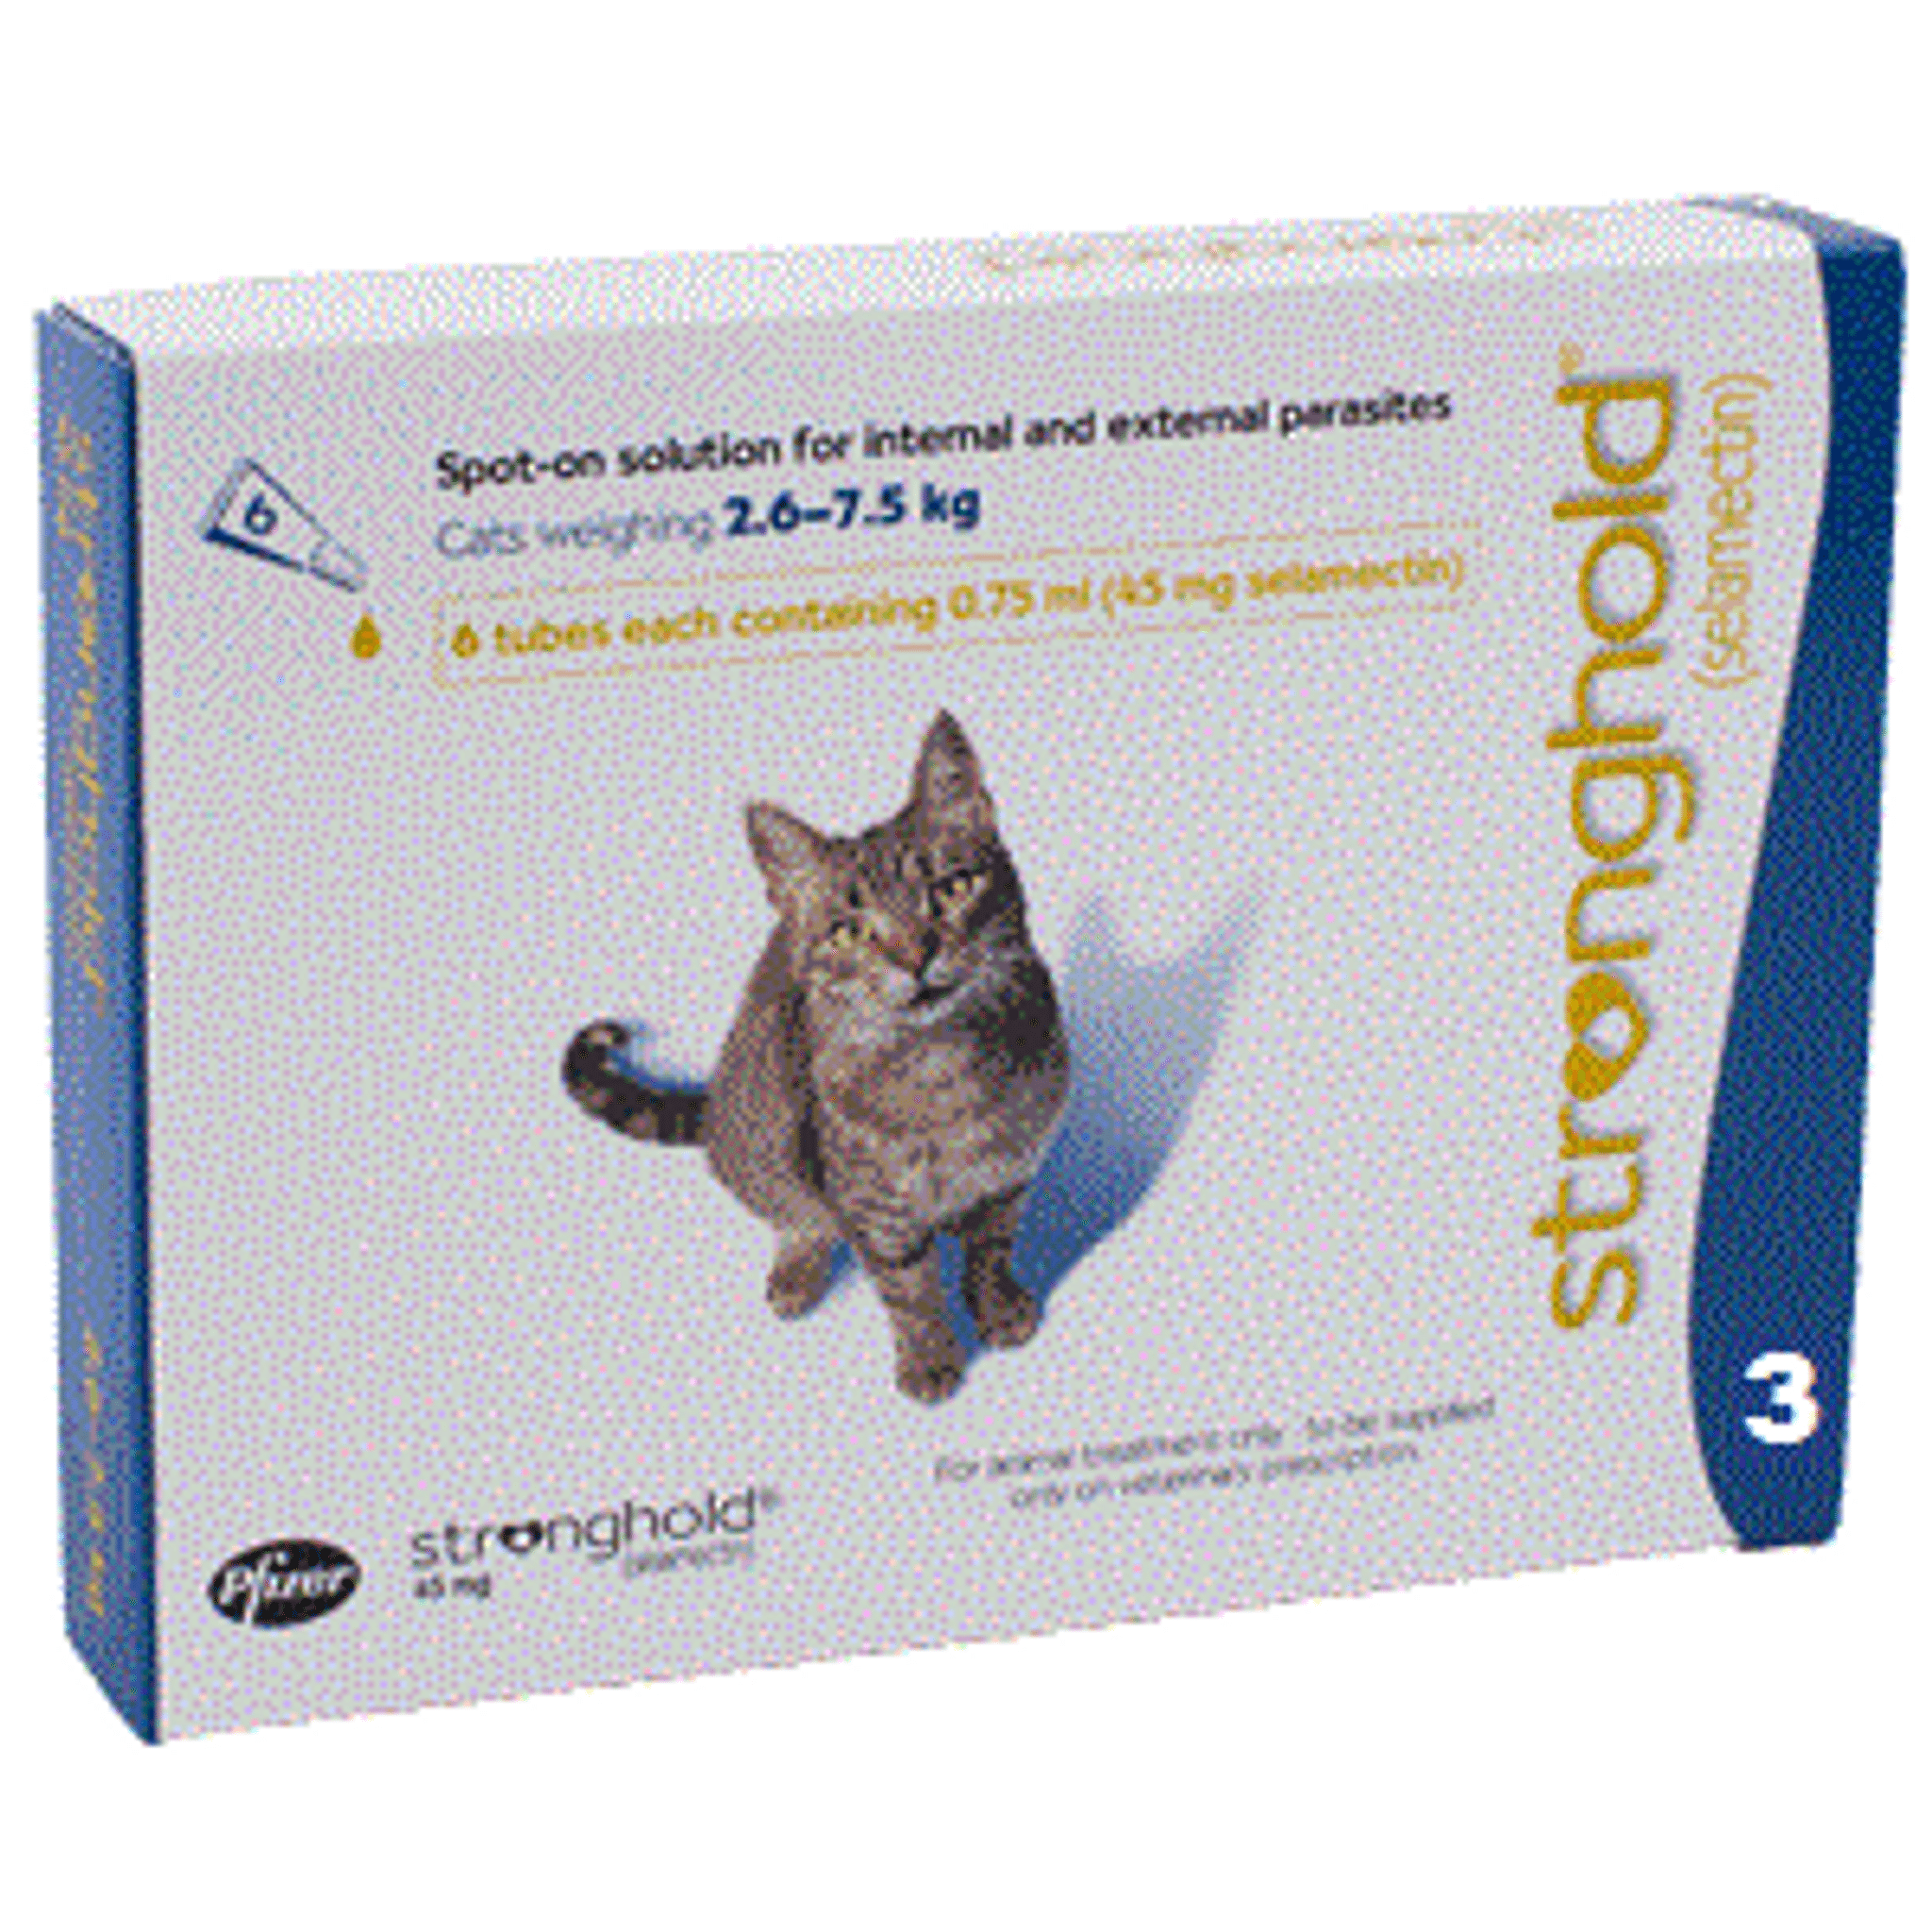 Wreedheid Ver weg Mening Stronghold for Cats 5.1-15 lbs (2.6-7.5 kg) - Blue 3 Doses | Discount Pet  Medication USA